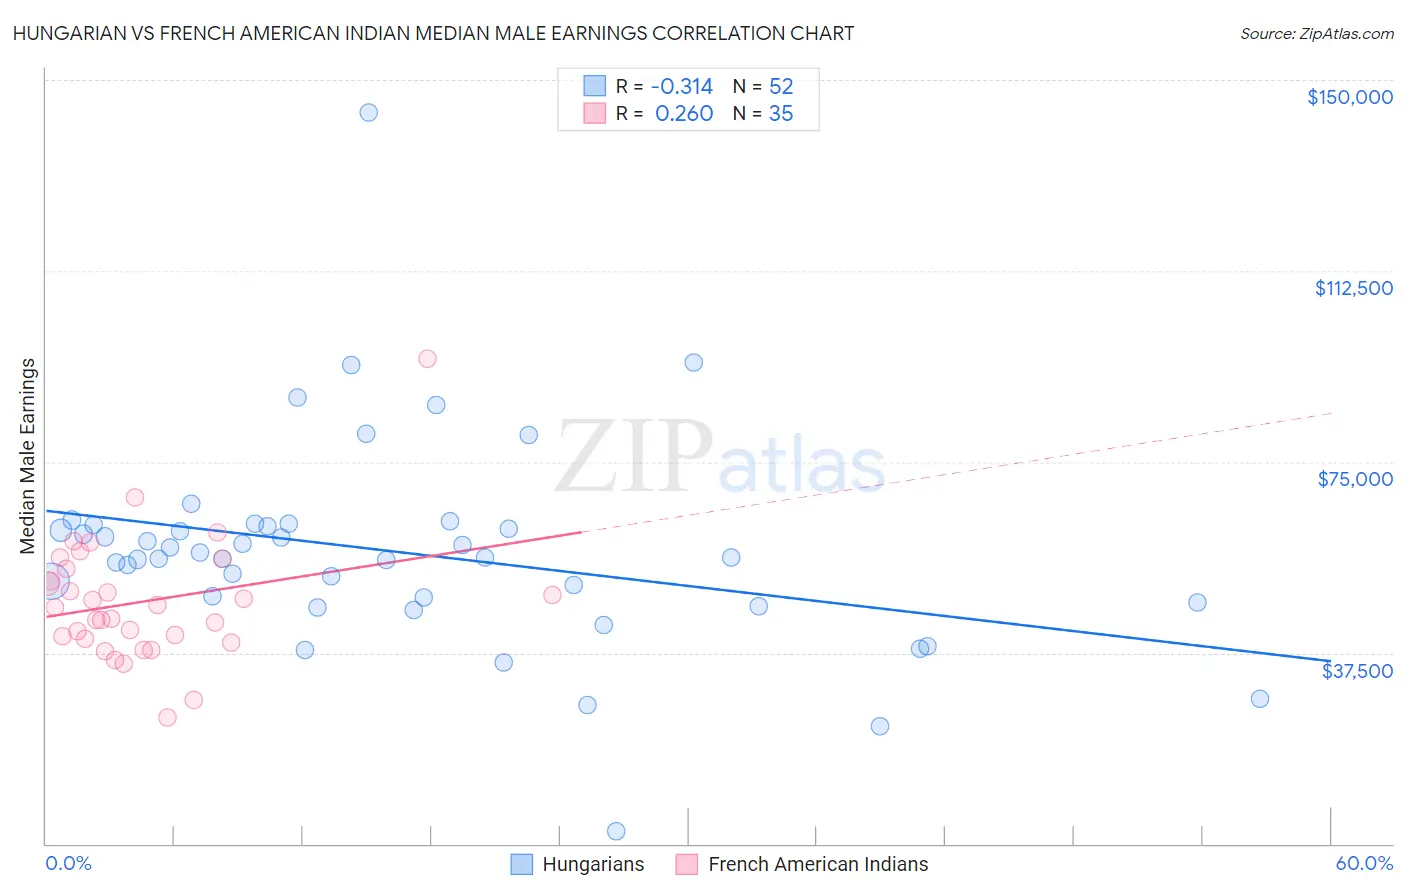 Hungarian vs French American Indian Median Male Earnings